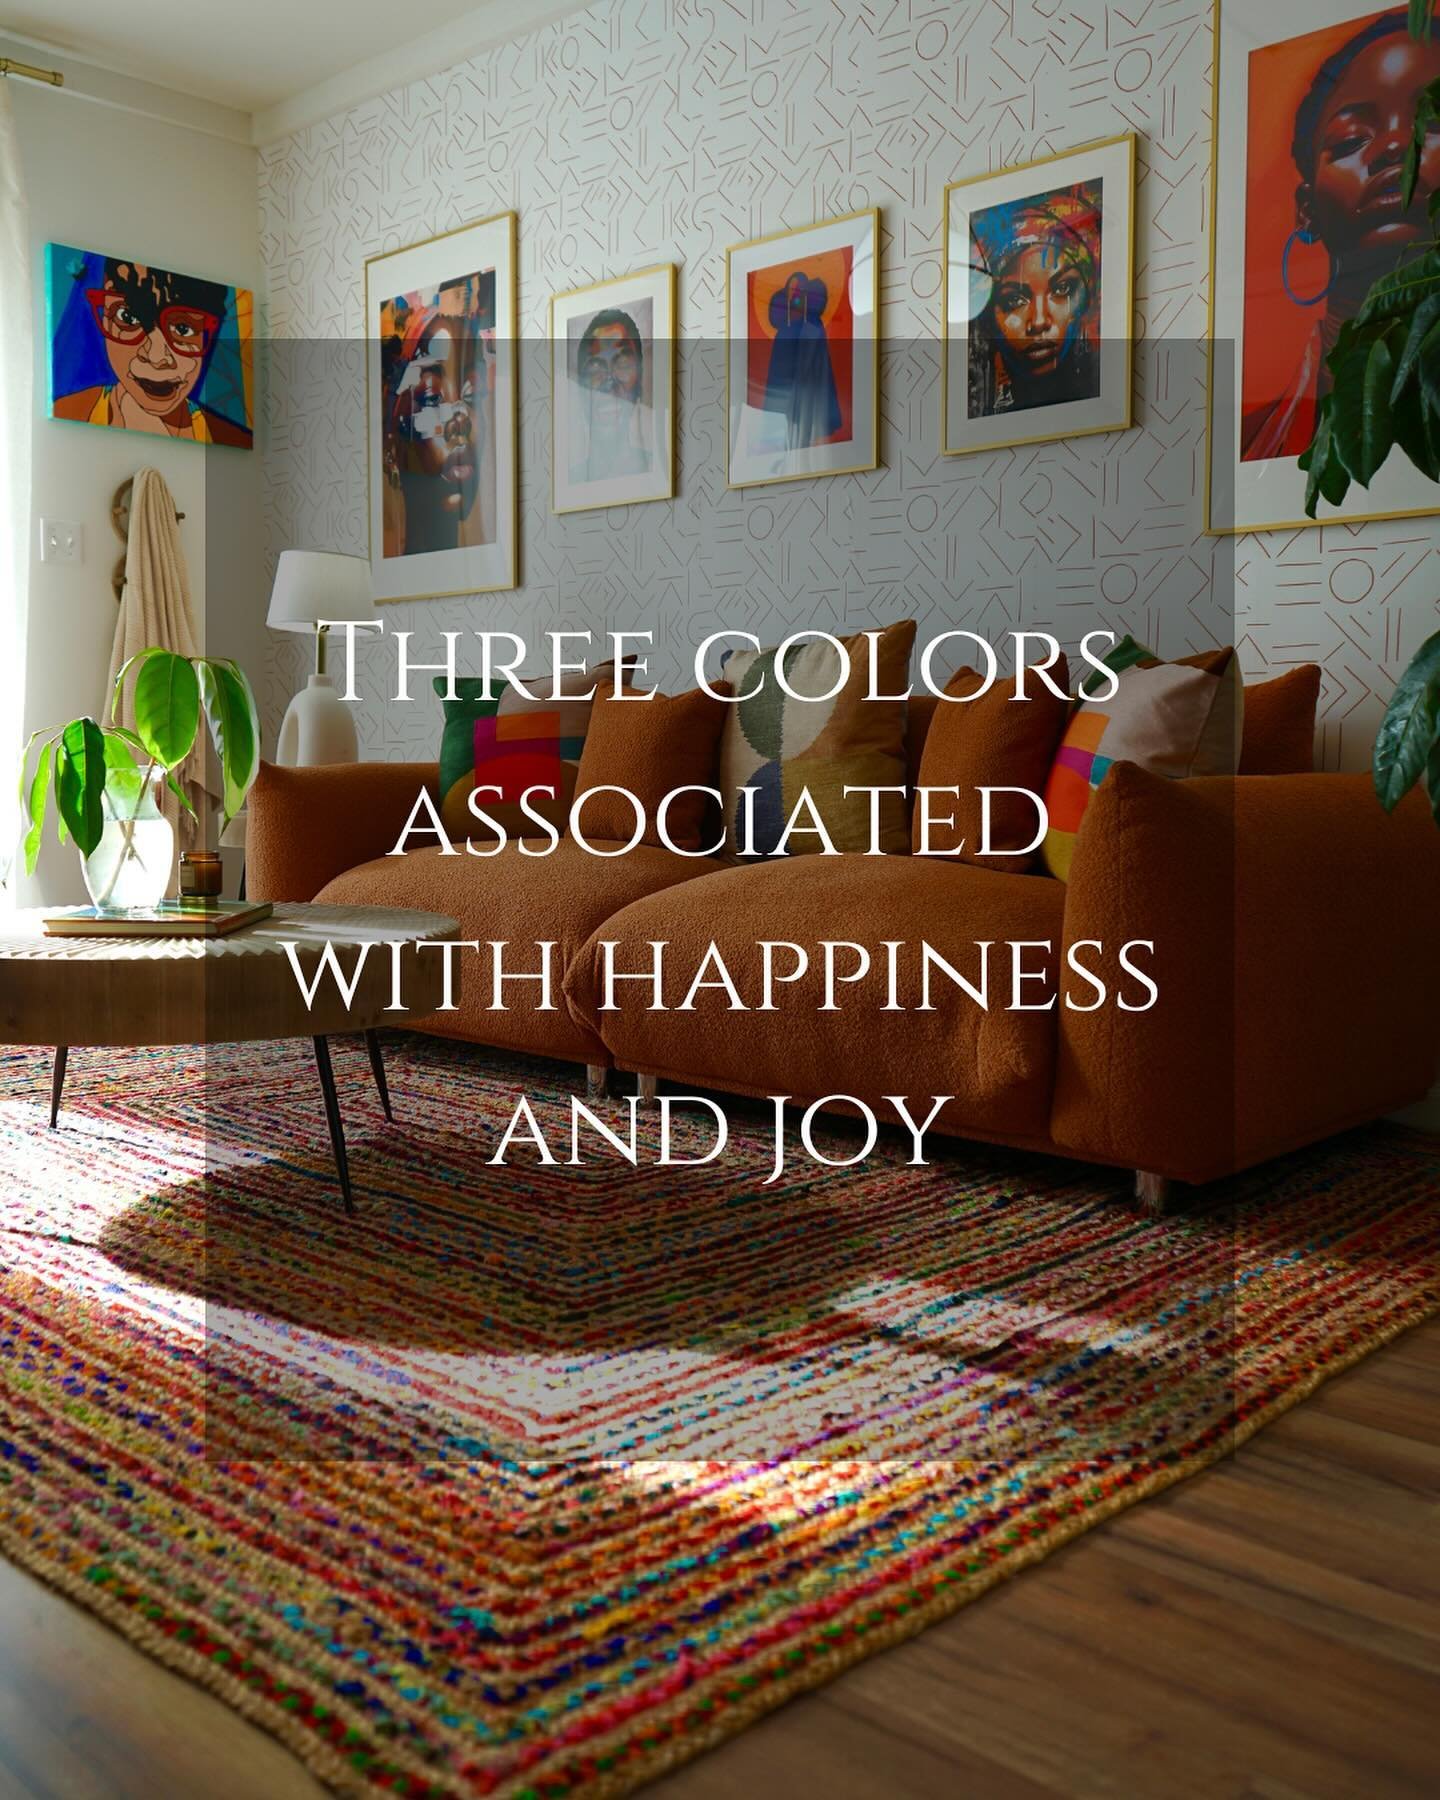 A little color psychology on this #wellnesswednesday Save this post for the next time you are feeling down and need a pick me up. 💛✨

#wellnesswednesdays #colorpsychology #livewellbewell #homeandsanctuary